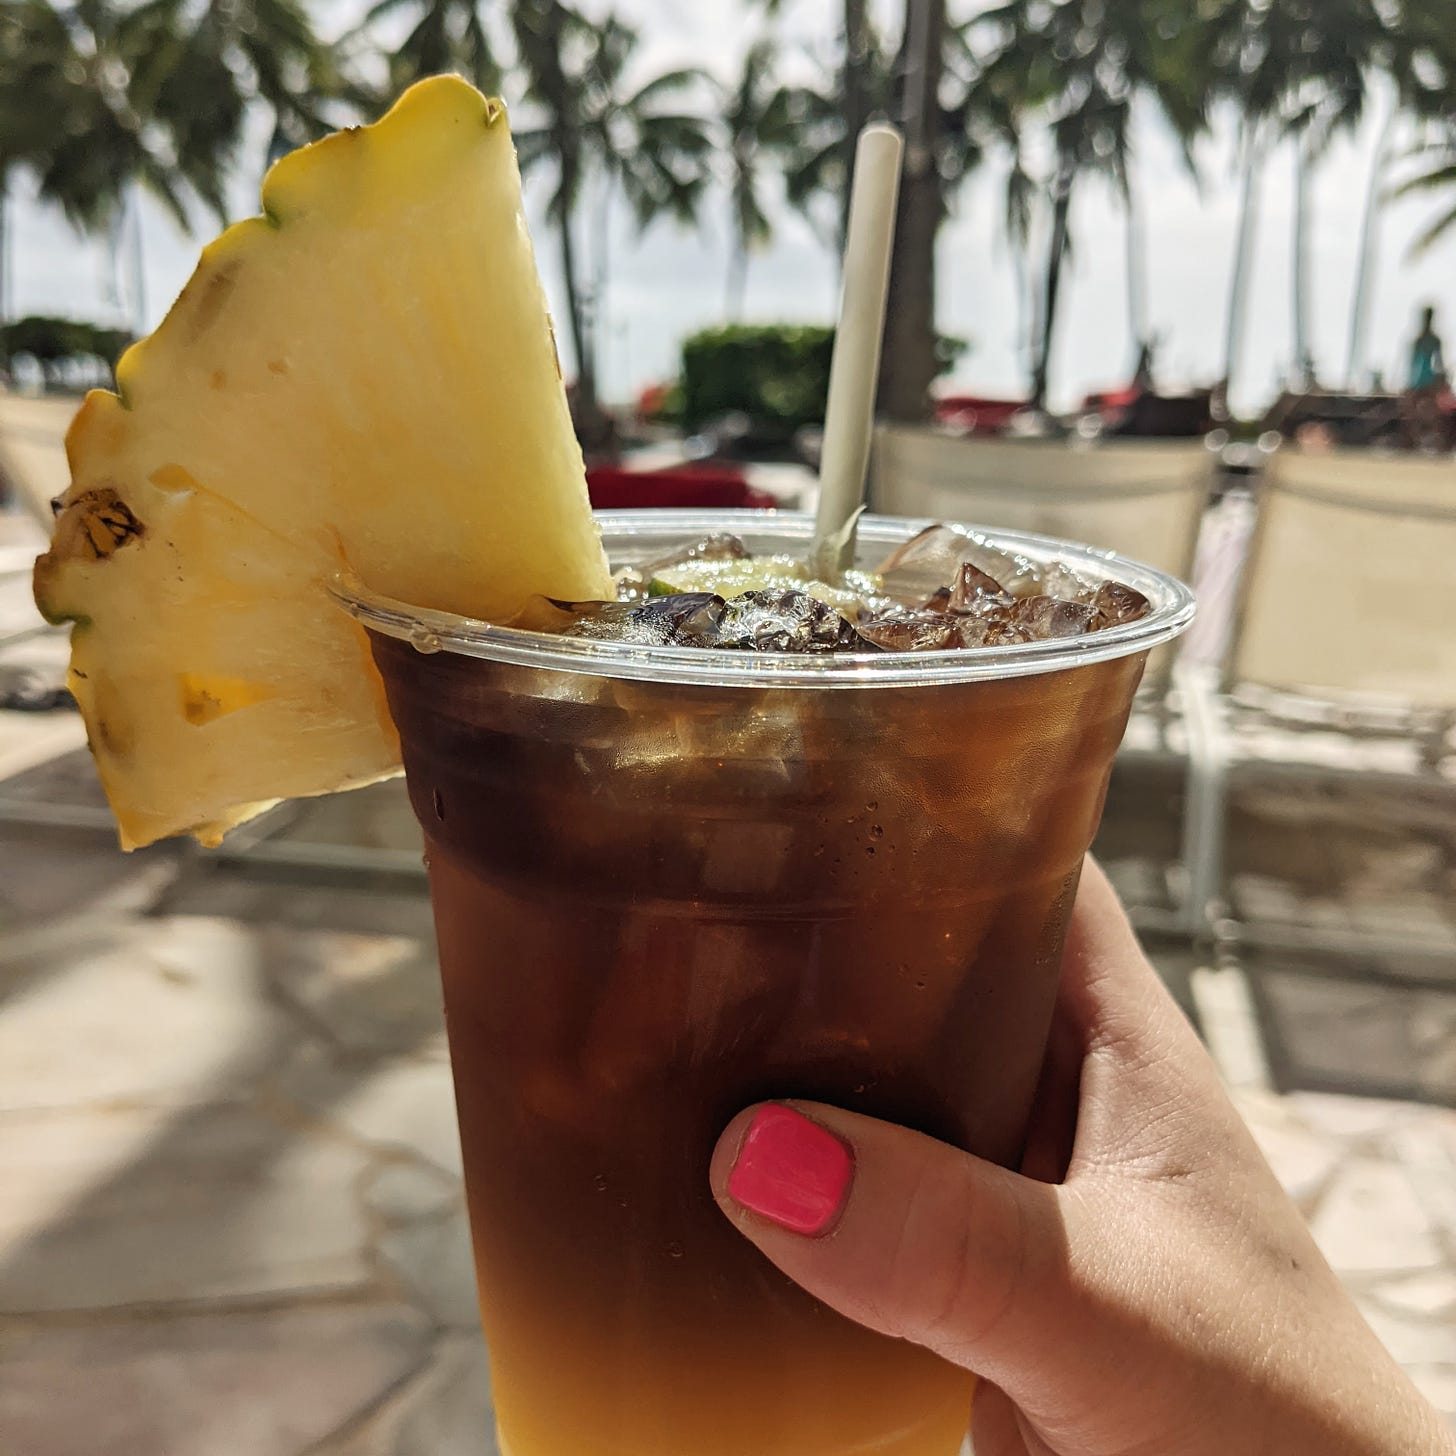 A woman's hand holding a plastic cup with a mai tai cocktail and a pineapple wedge